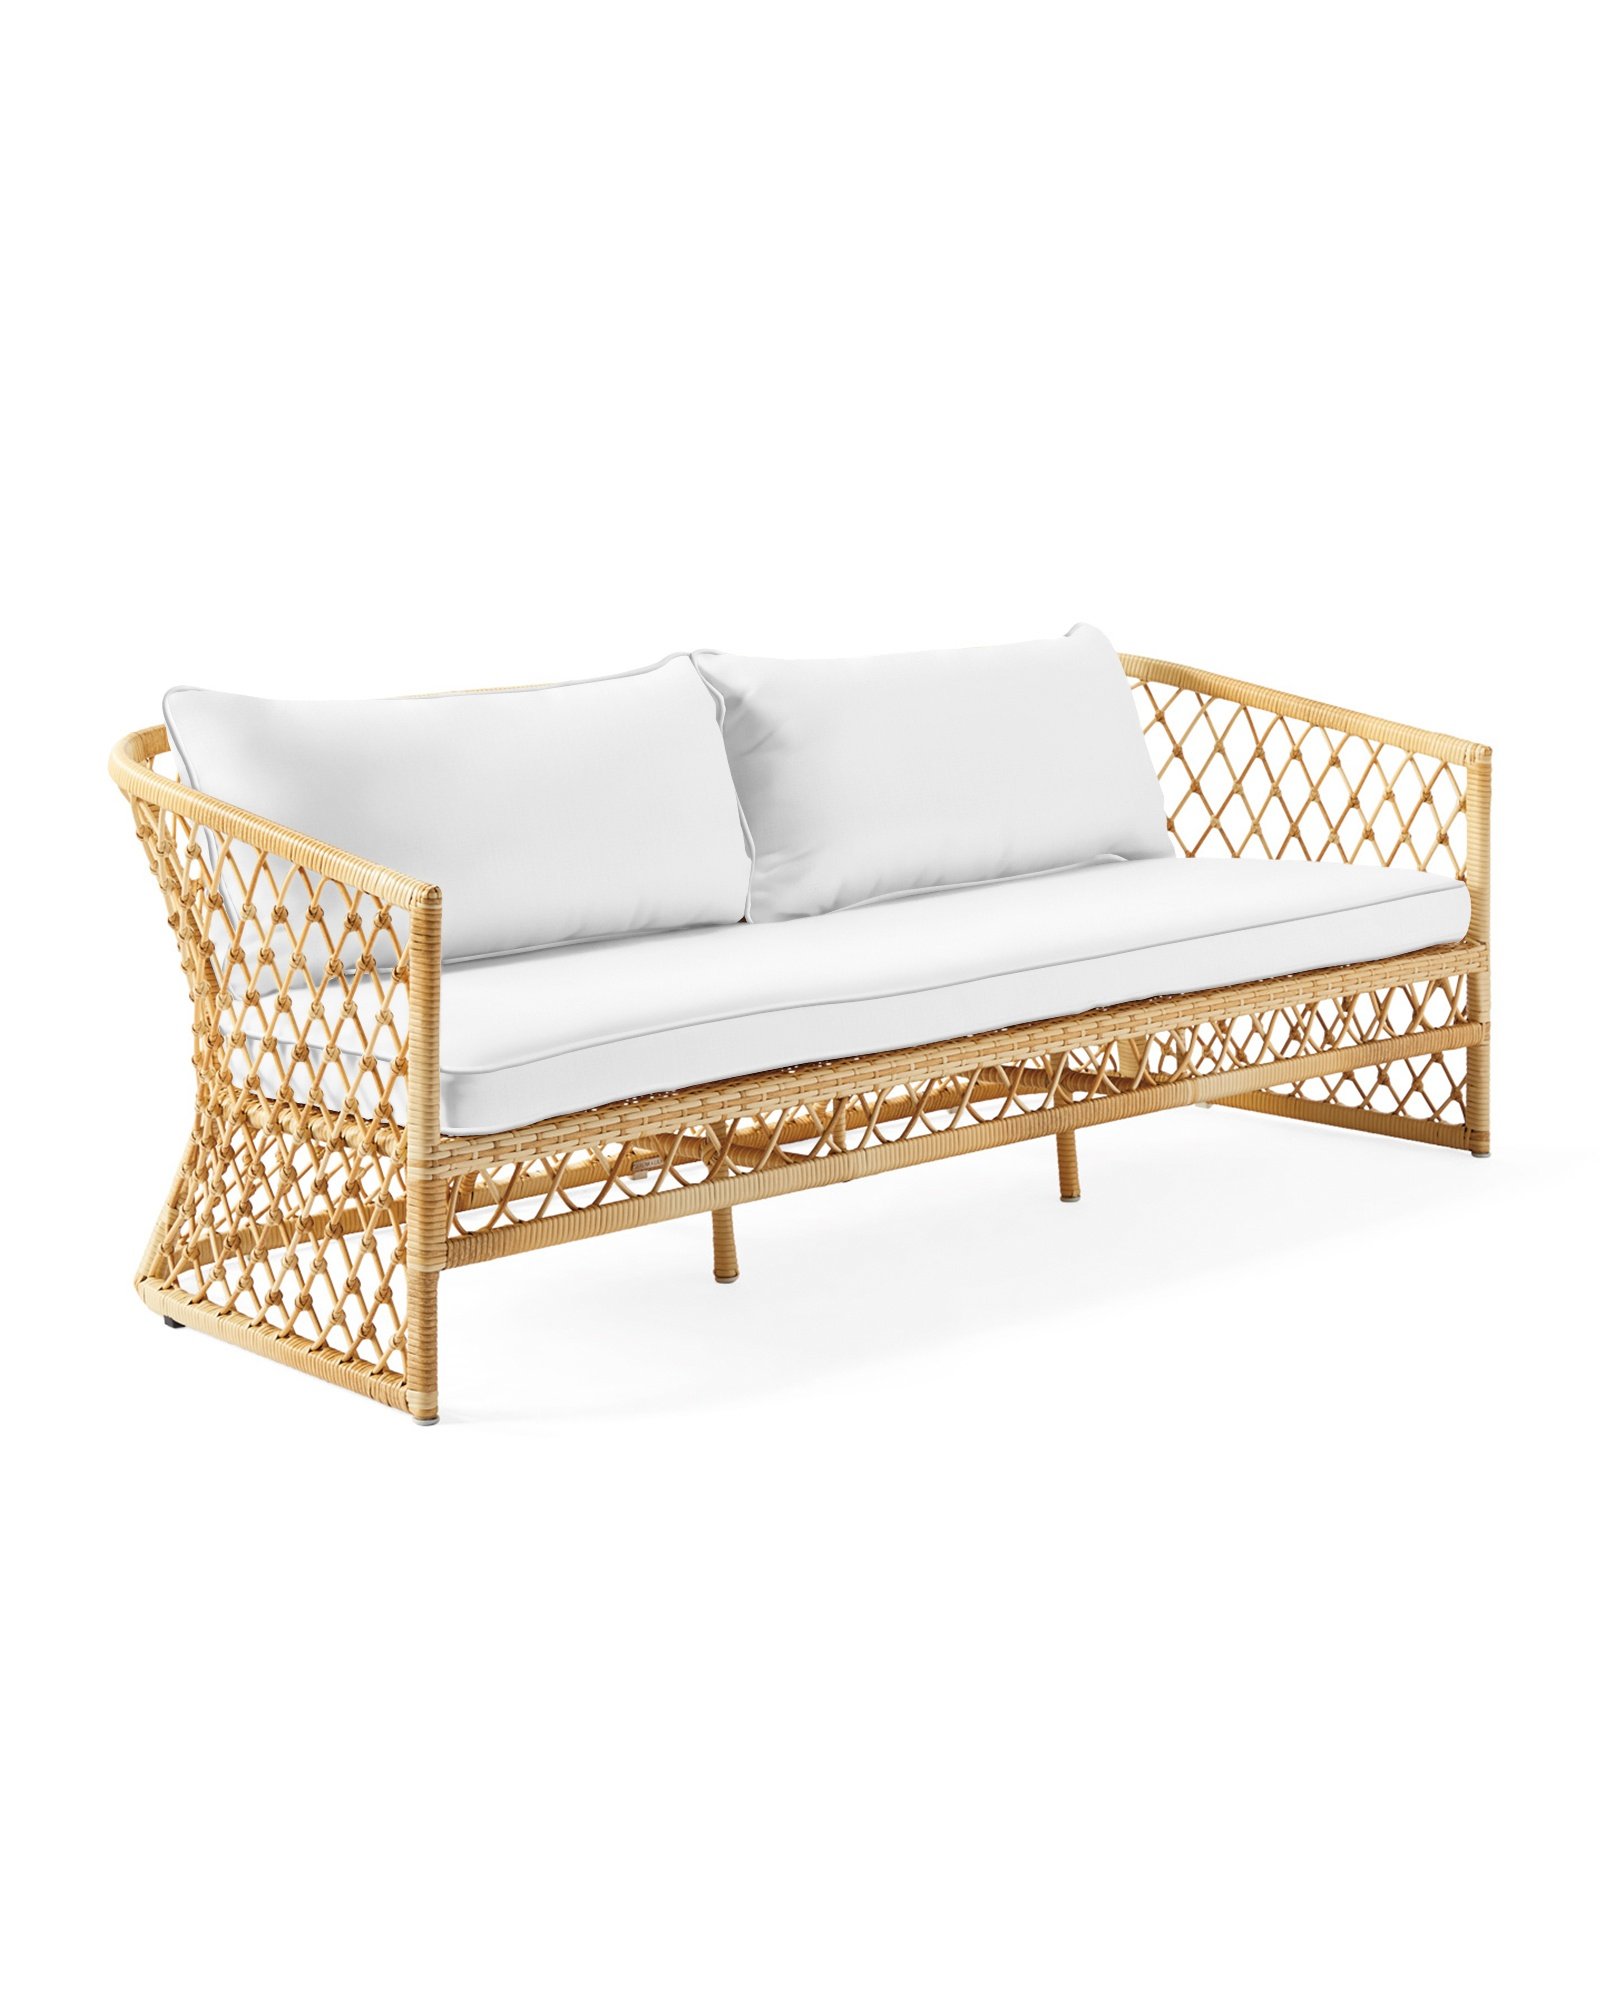 Rattan Capistrano outdoor sofa by Serena and Lily